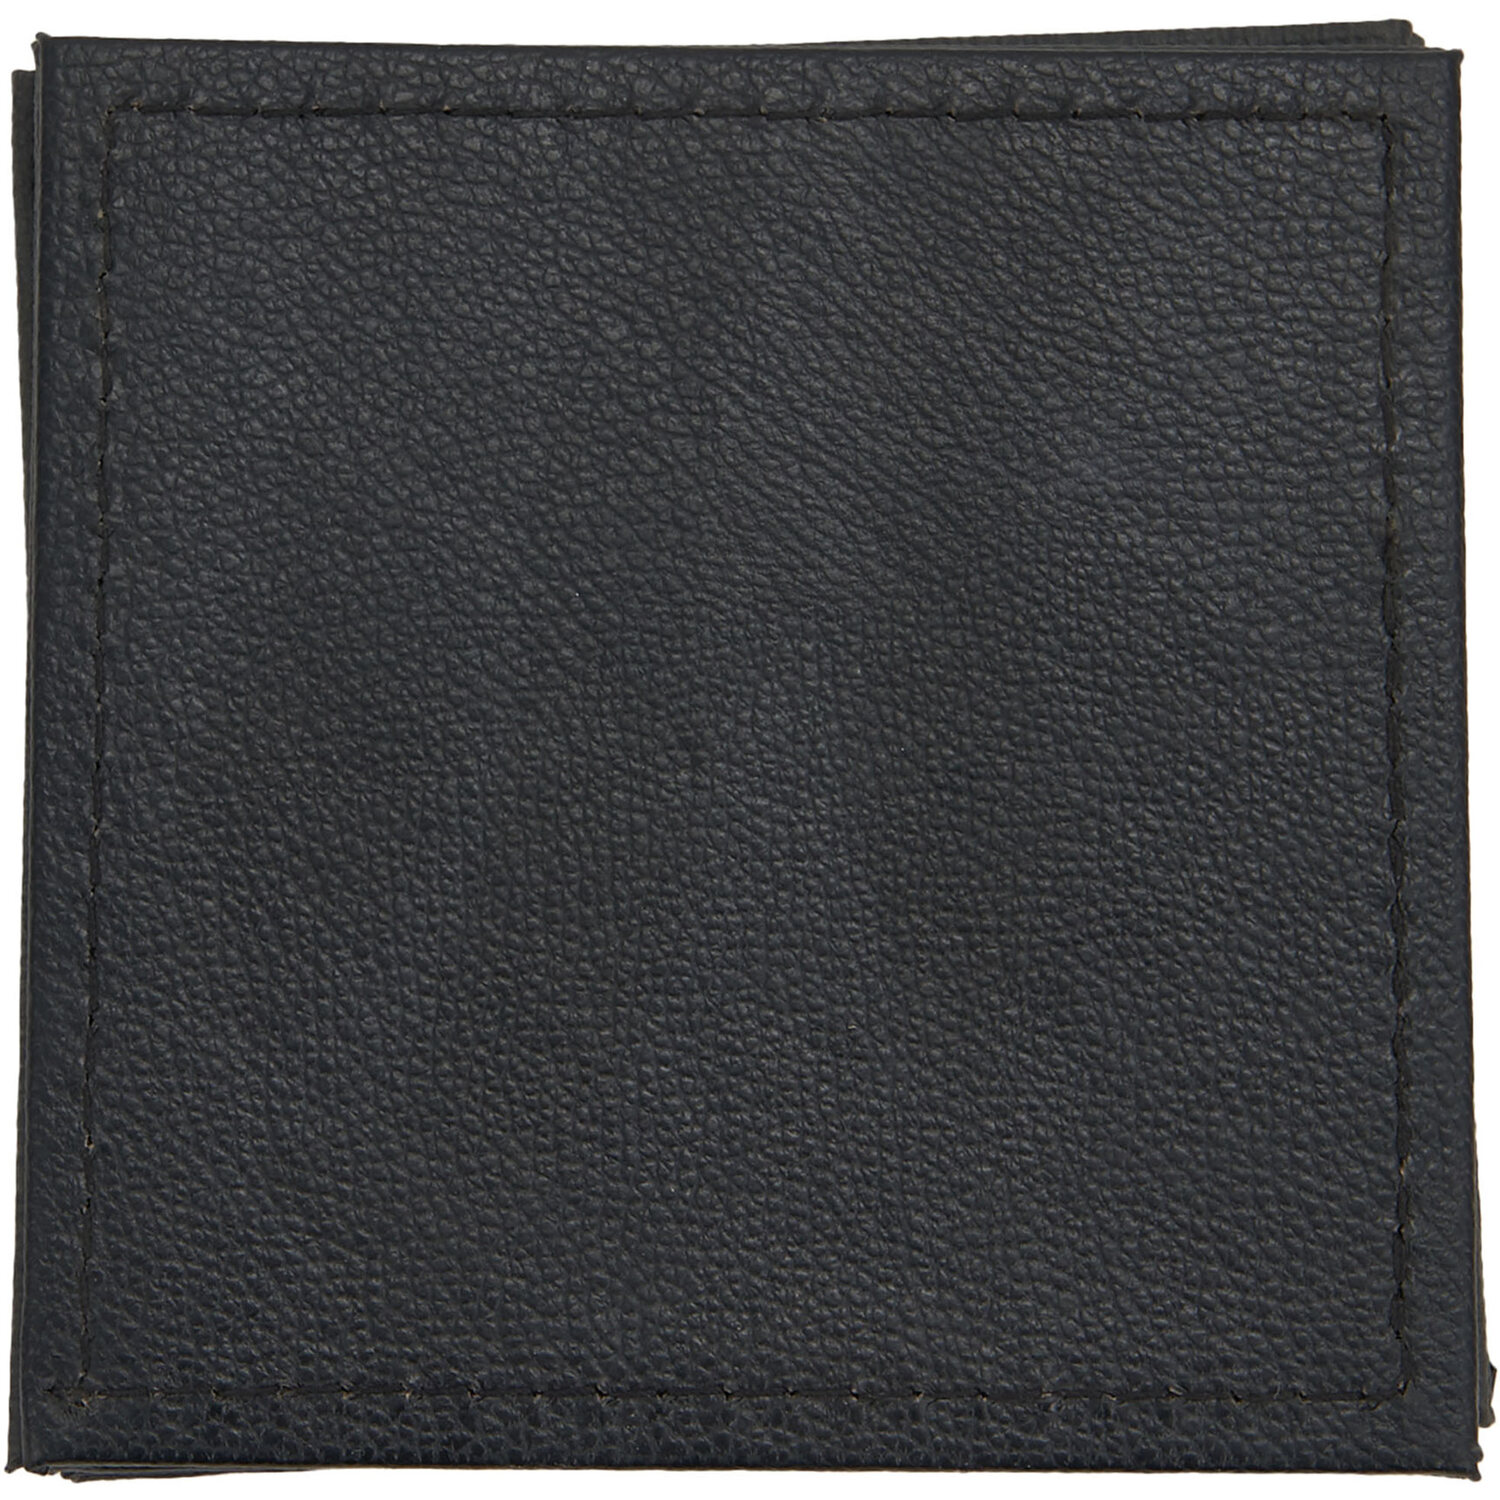 Pack of 4 Linen Texture Coasters - Black Image 2